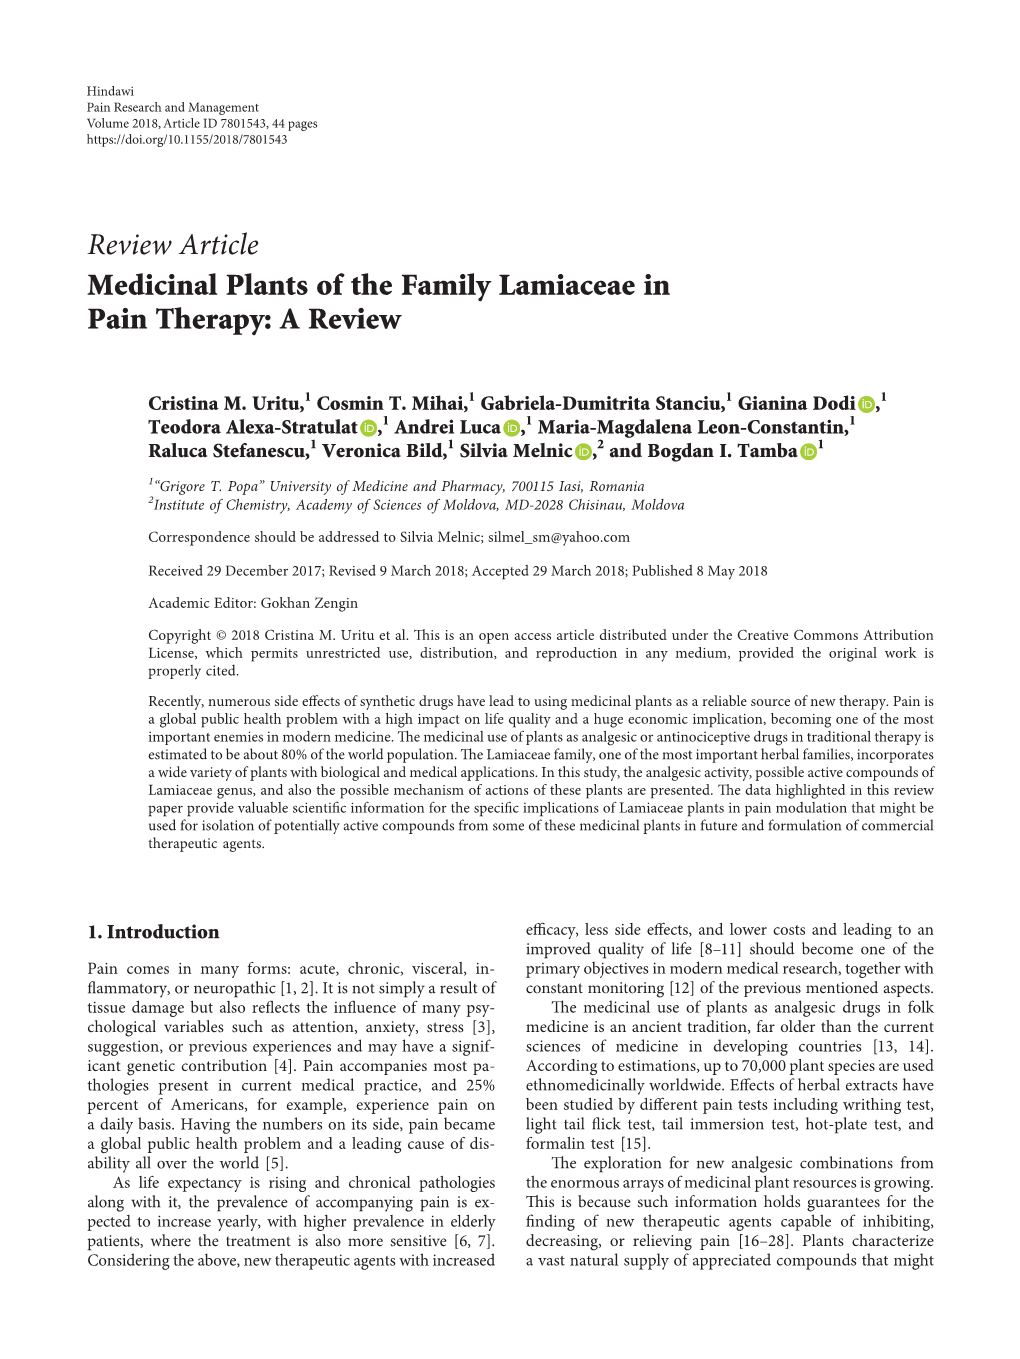 Review Article Medicinal Plants of the Family Lamiaceae in Pain Therapy: a Review